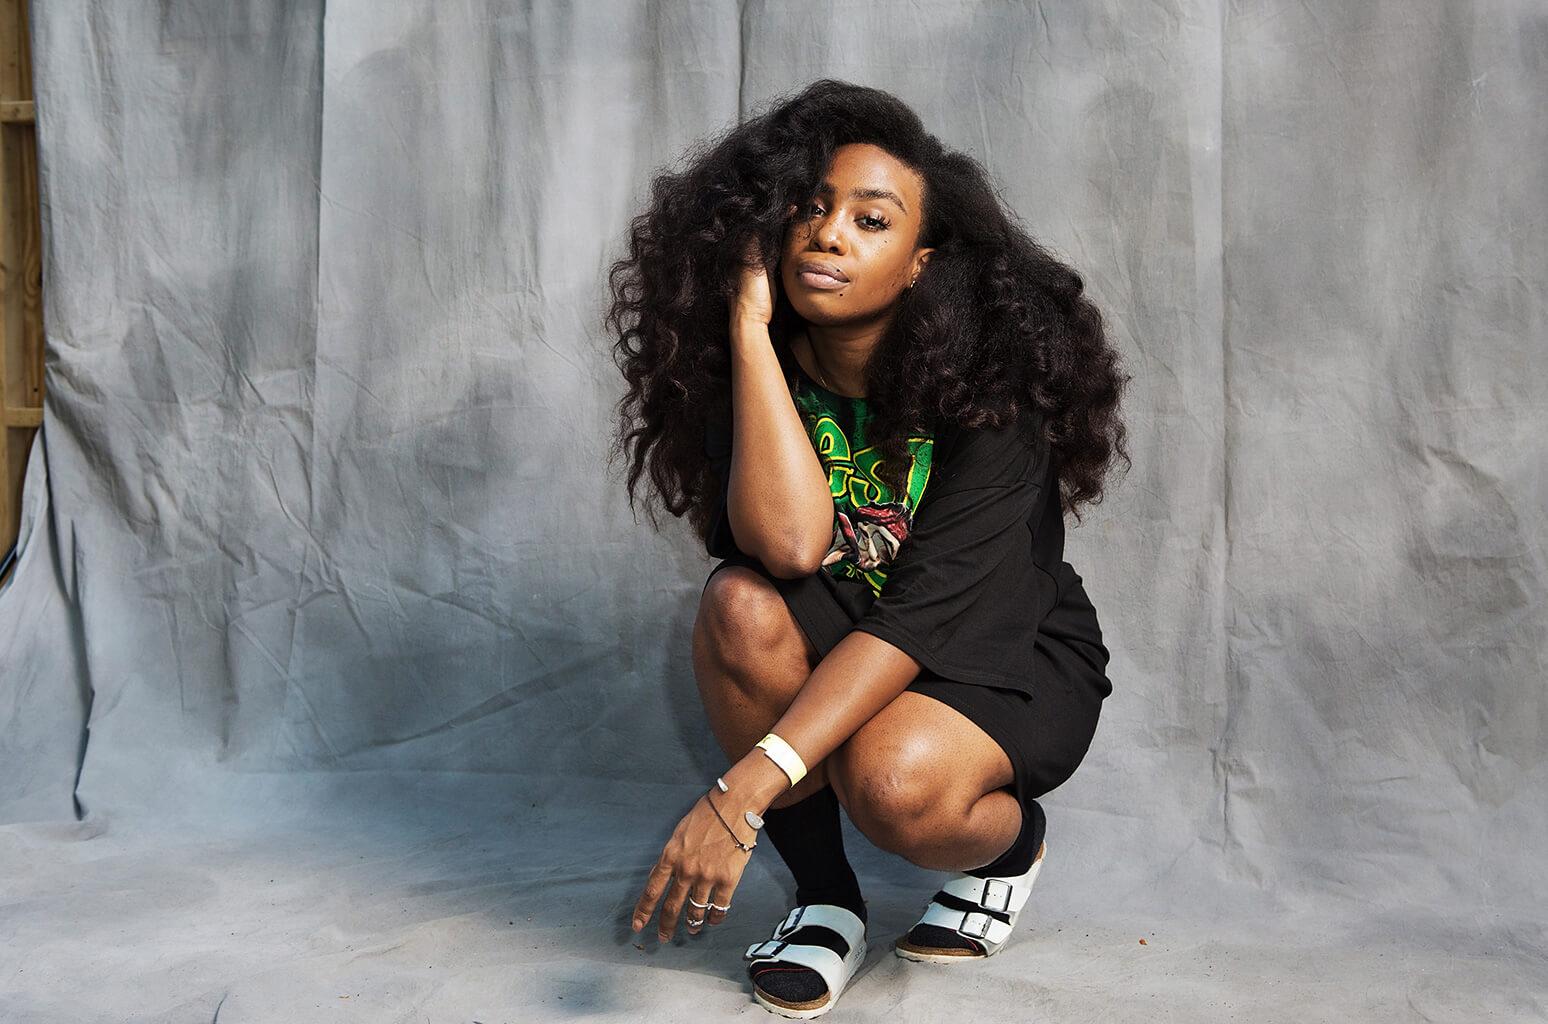 49 Hot Pictures Of Sza Which Are Stunningly Ravishing | Best Of Comic Books